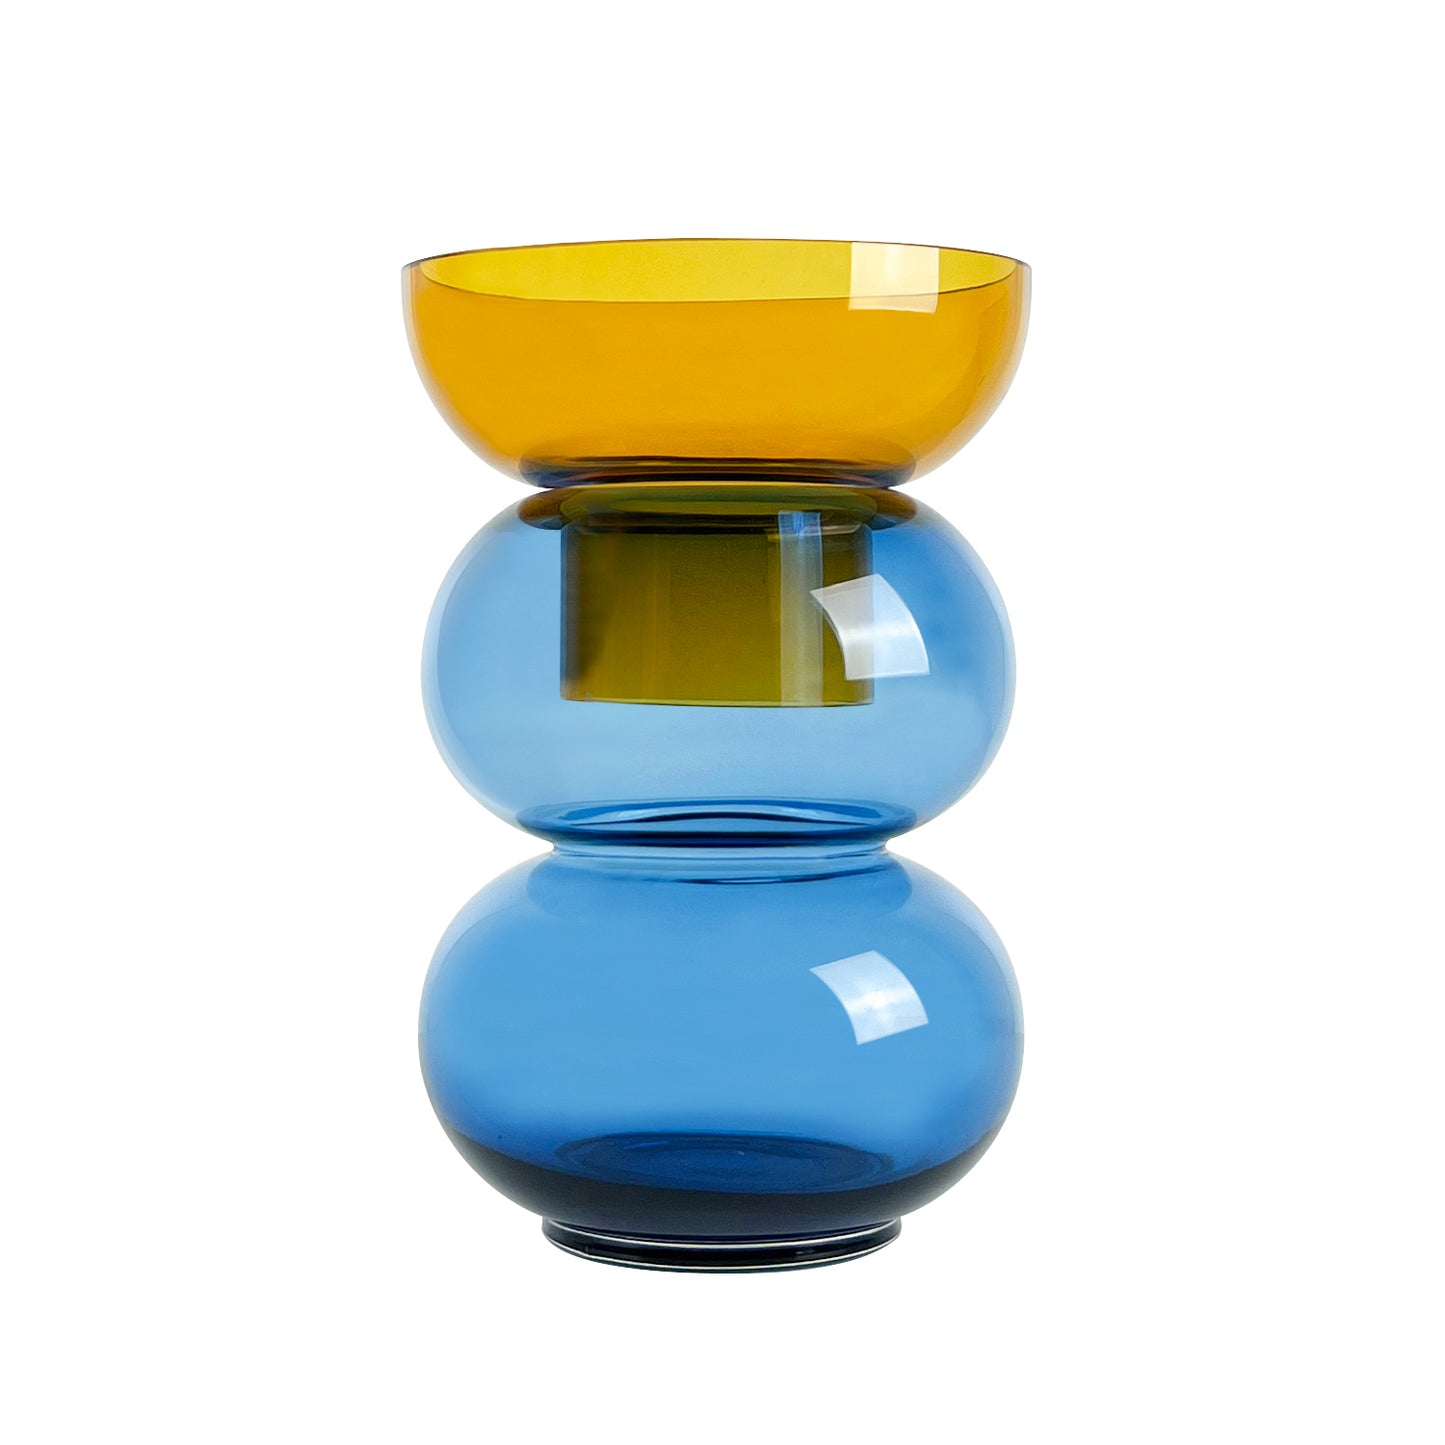 Cloudnola Majestic Bubble Vase in Large Yellow and Blue